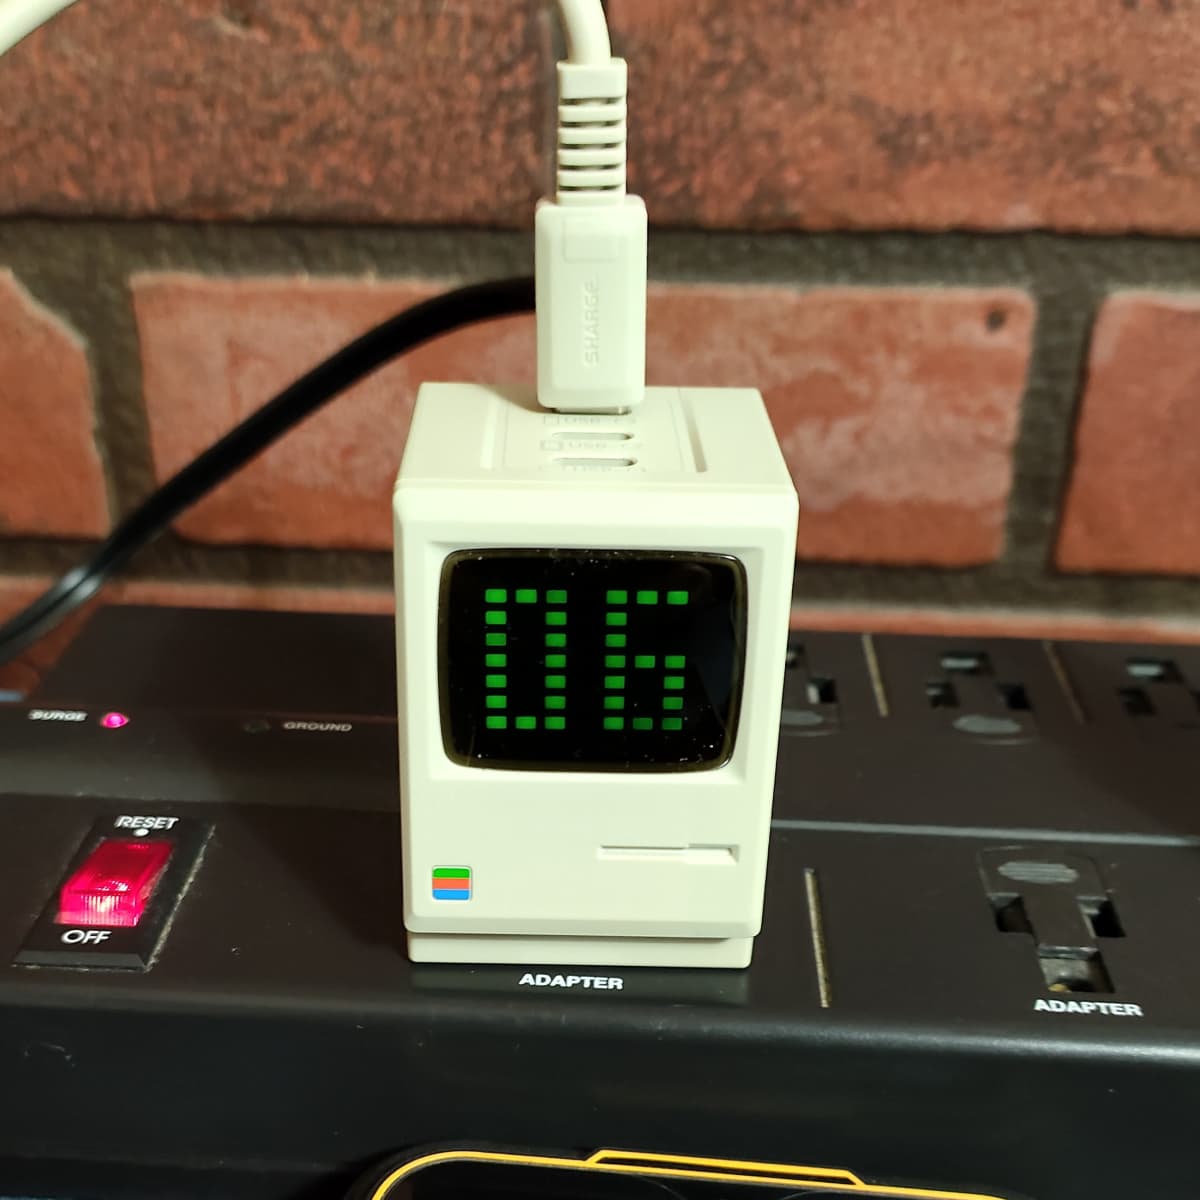 Review of the SHARGEEK Retro 67W Charger With Power Display 